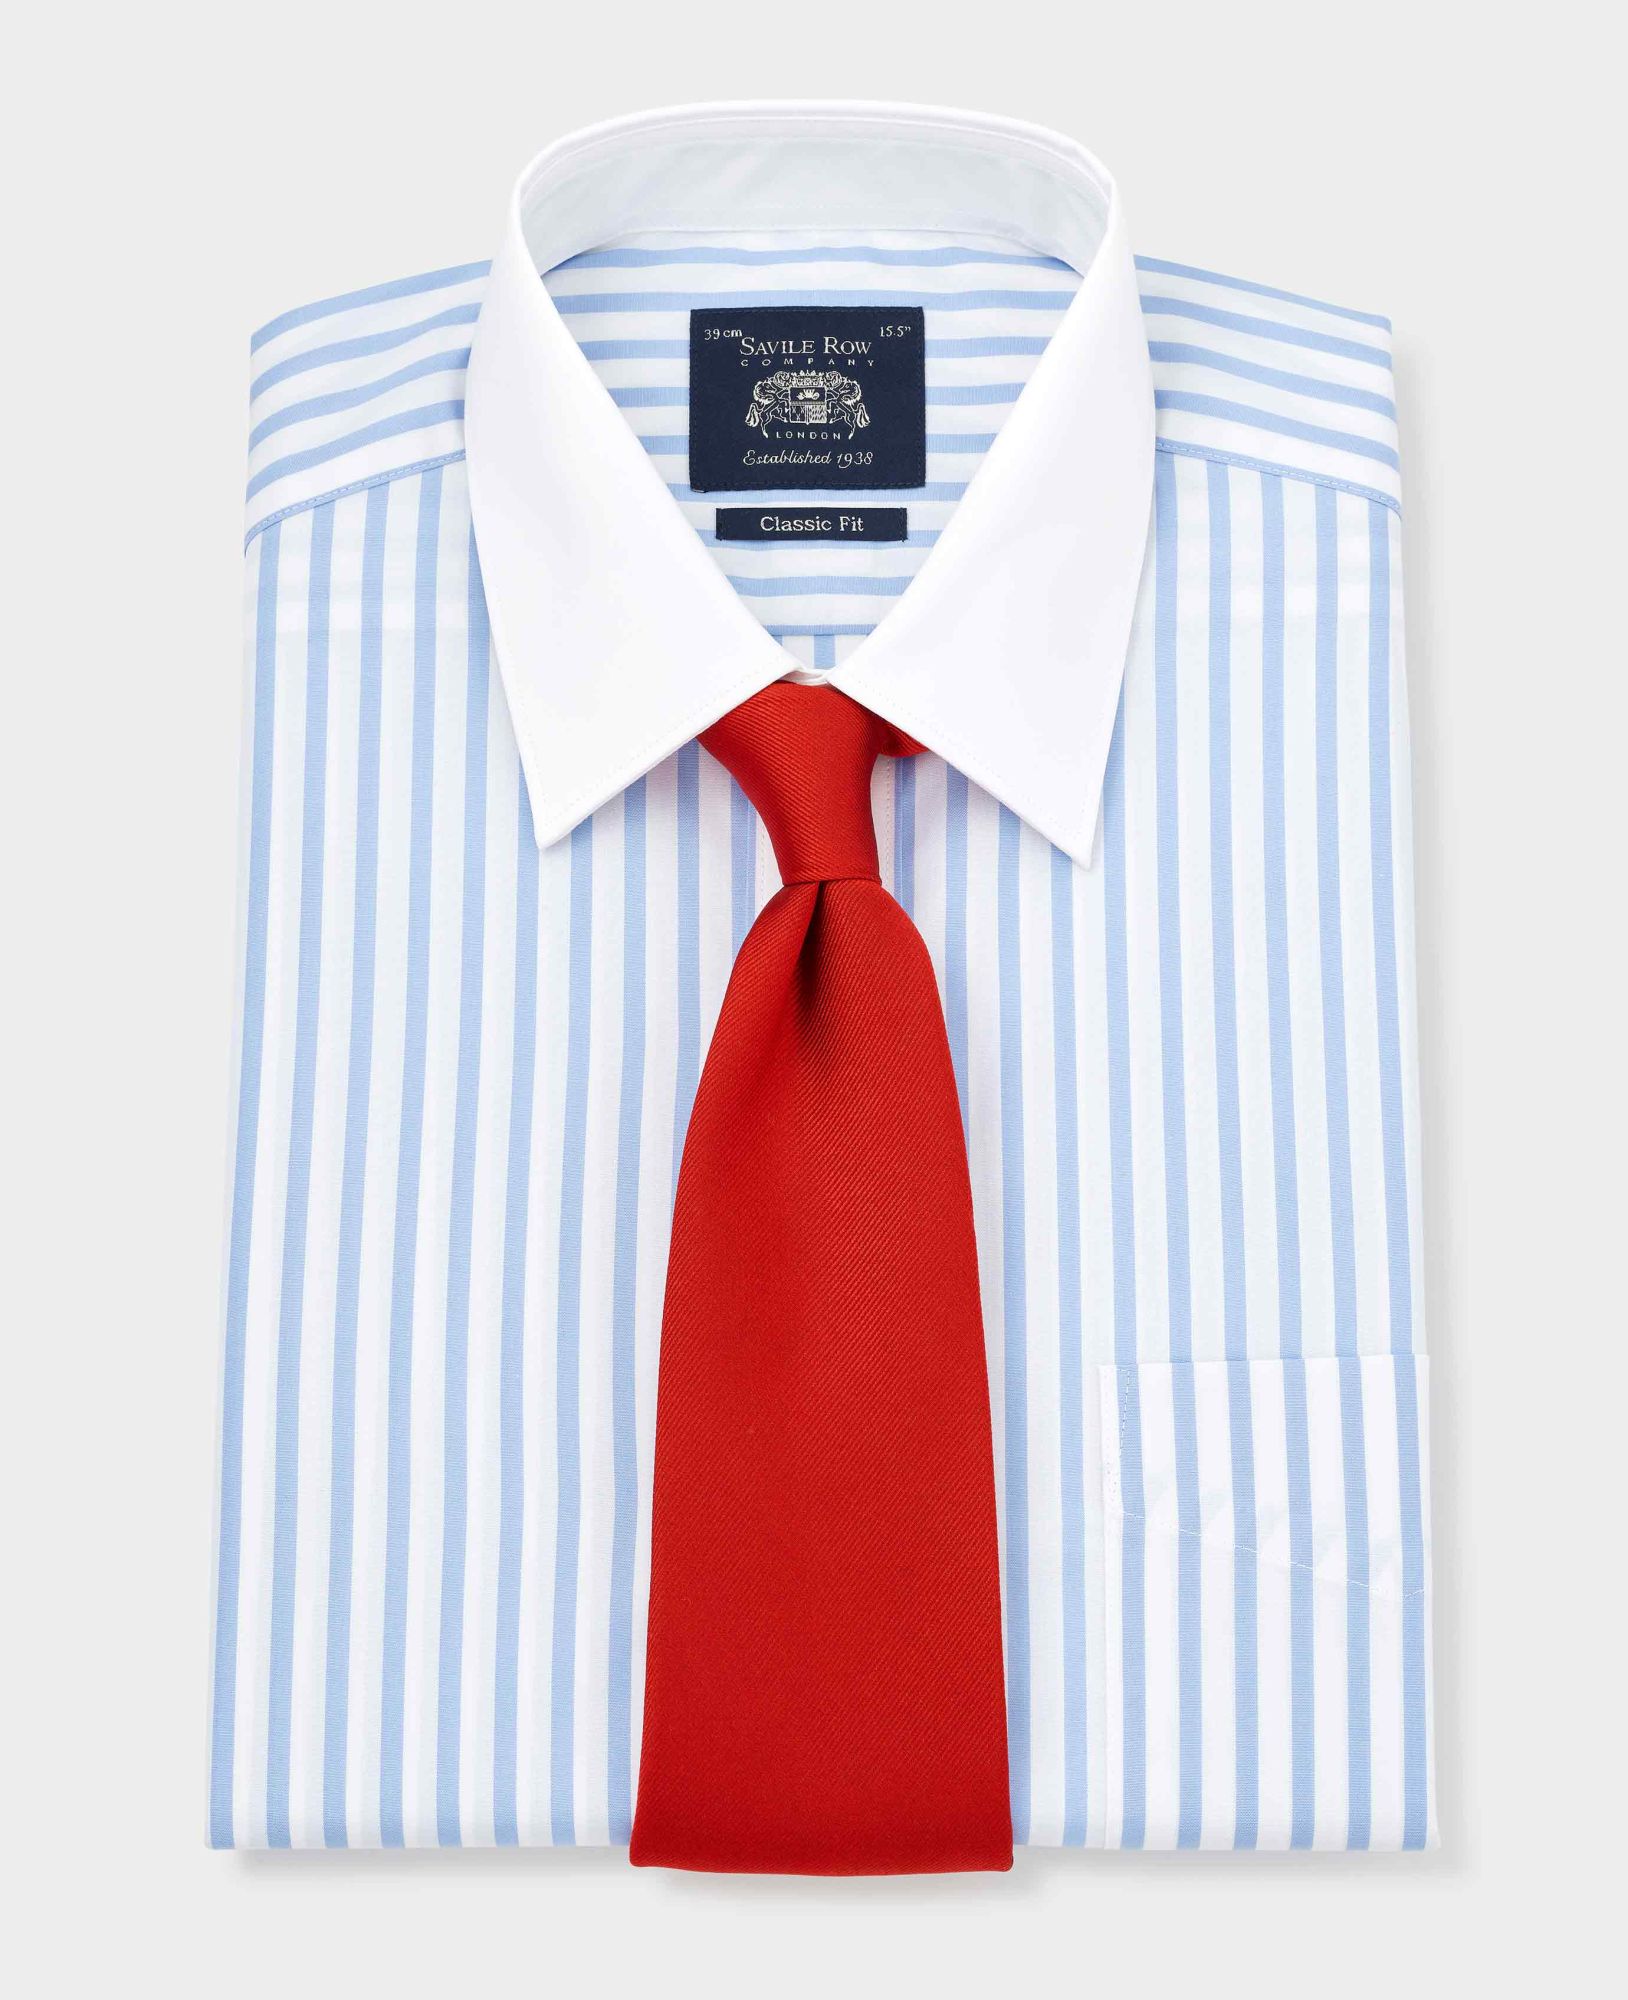 Sky Blue Stripe Classic Fit Contrast Collar Shirt With White Collar & Cuffs 19 1/2